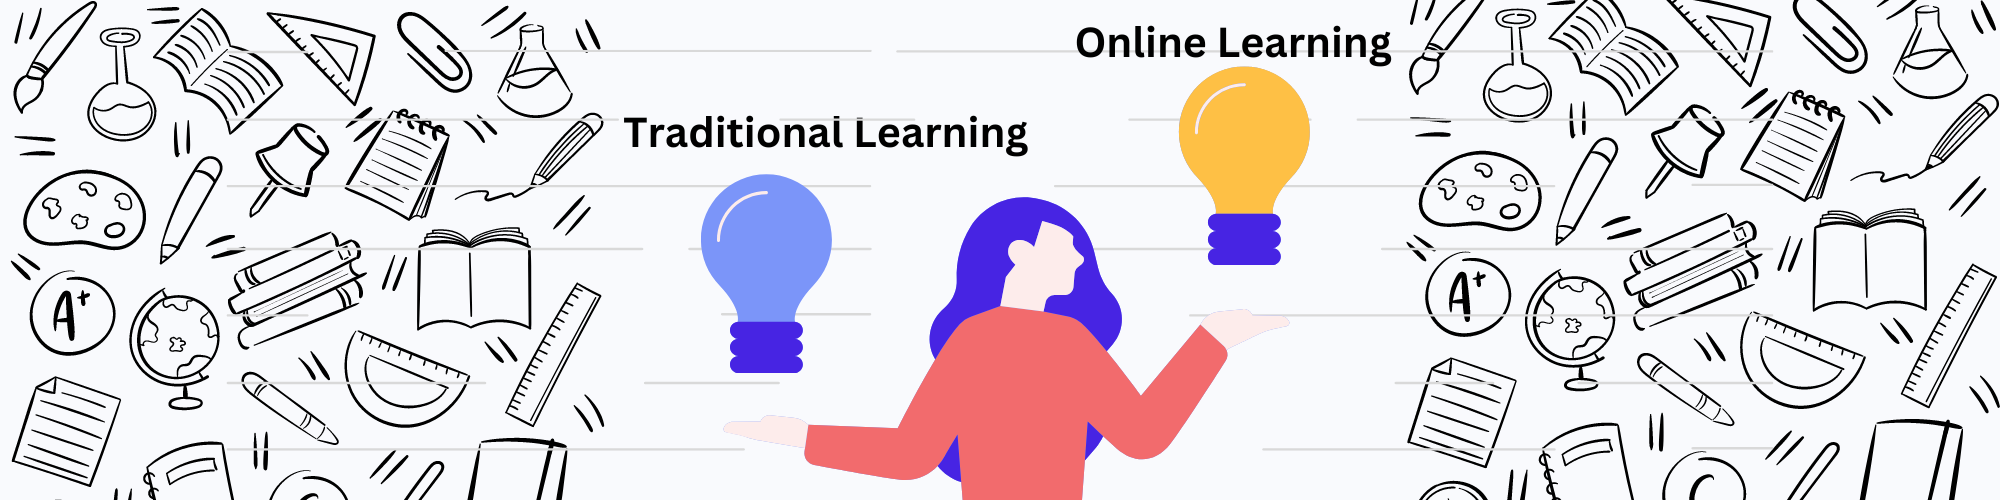 How can online education replace traditional education?